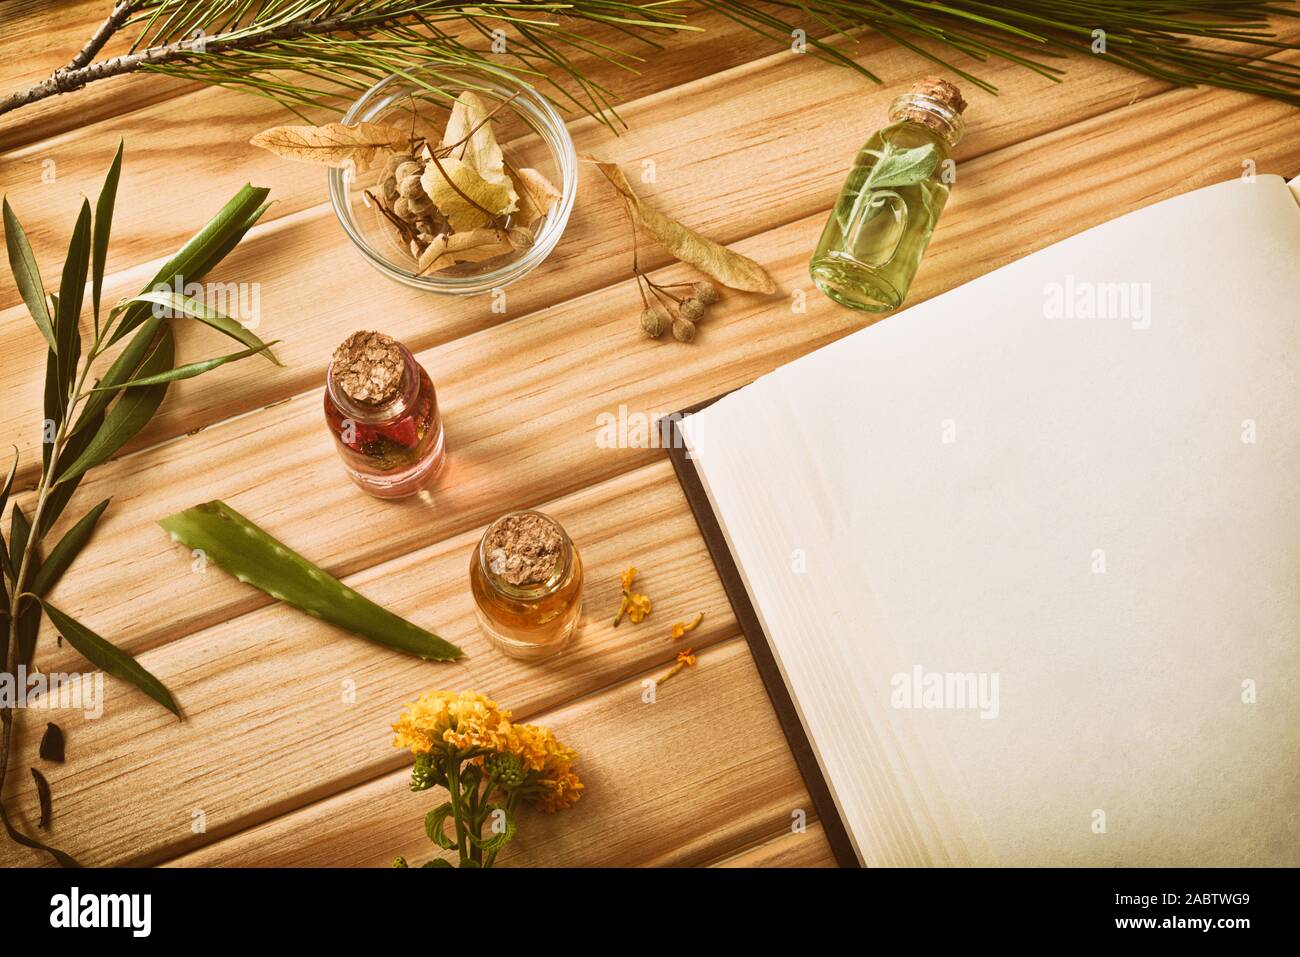 Blank book of recipes for the preparation of natural plant medicine on wooden table with medicinal and aromatic plants close up. Top view. Horizontal Stock Photo